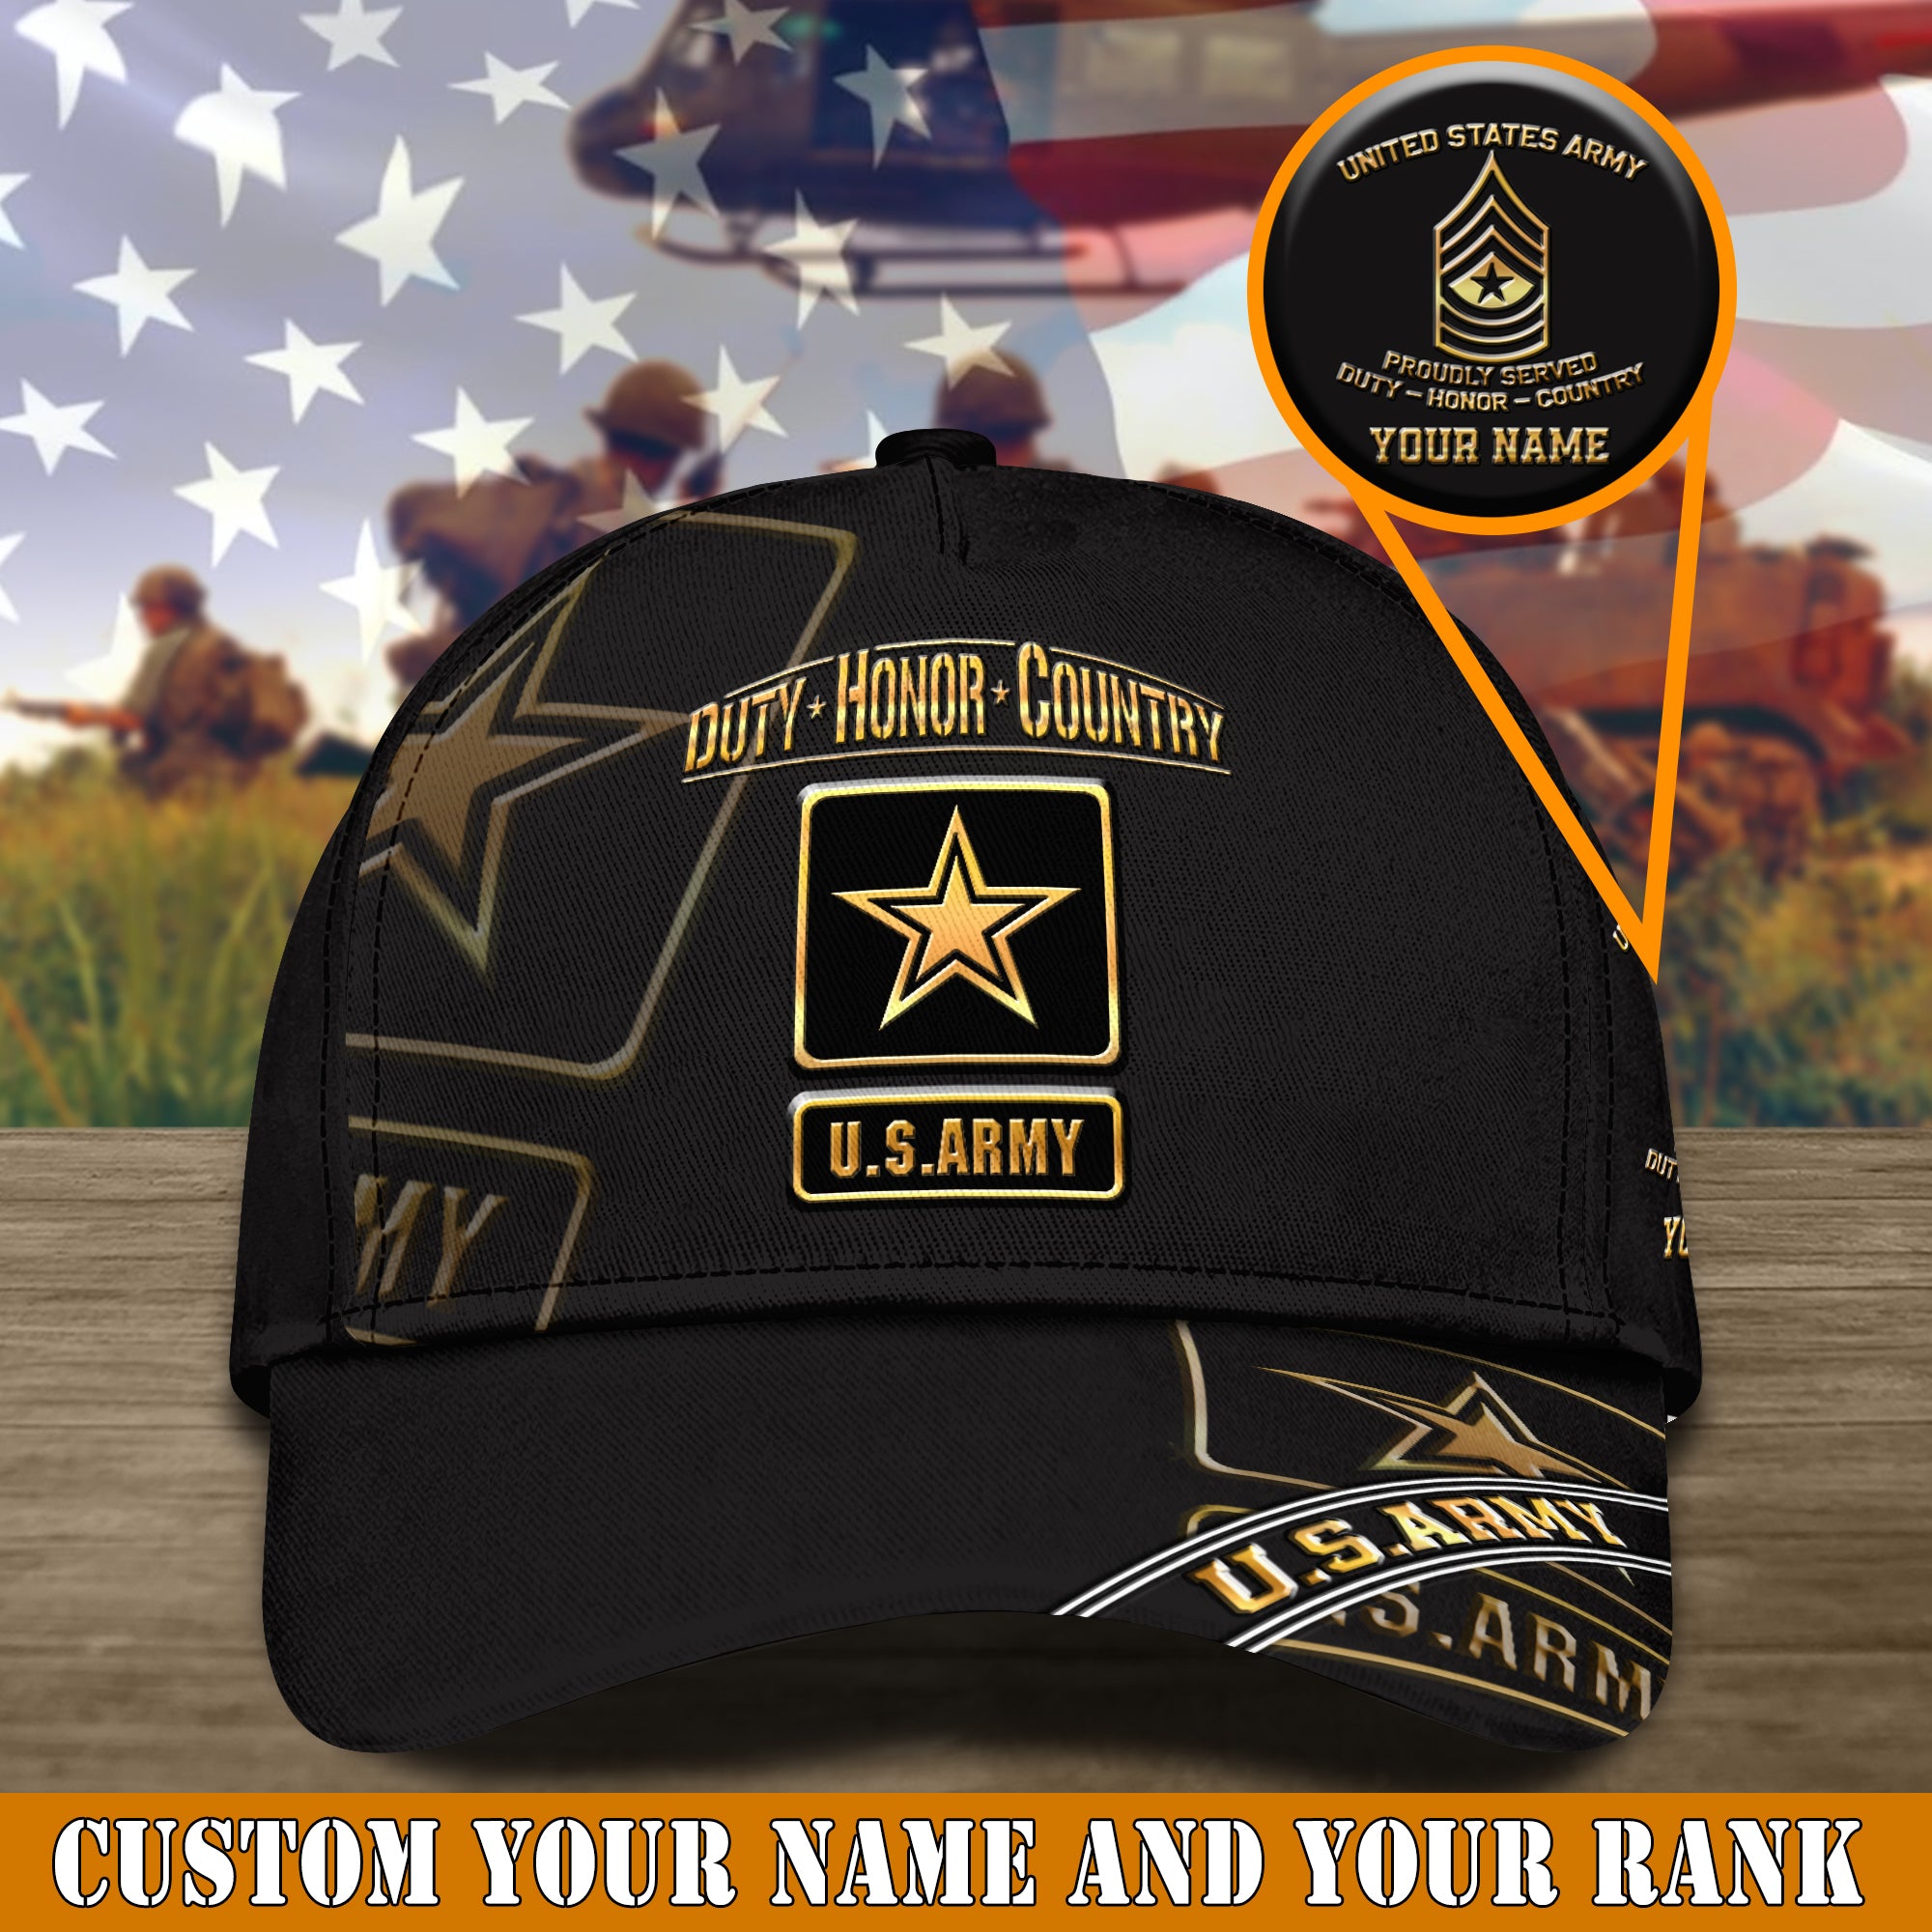 U.S Army Men Cap Duty Honor Country Baseball Cap For Military Personalized Army Gift